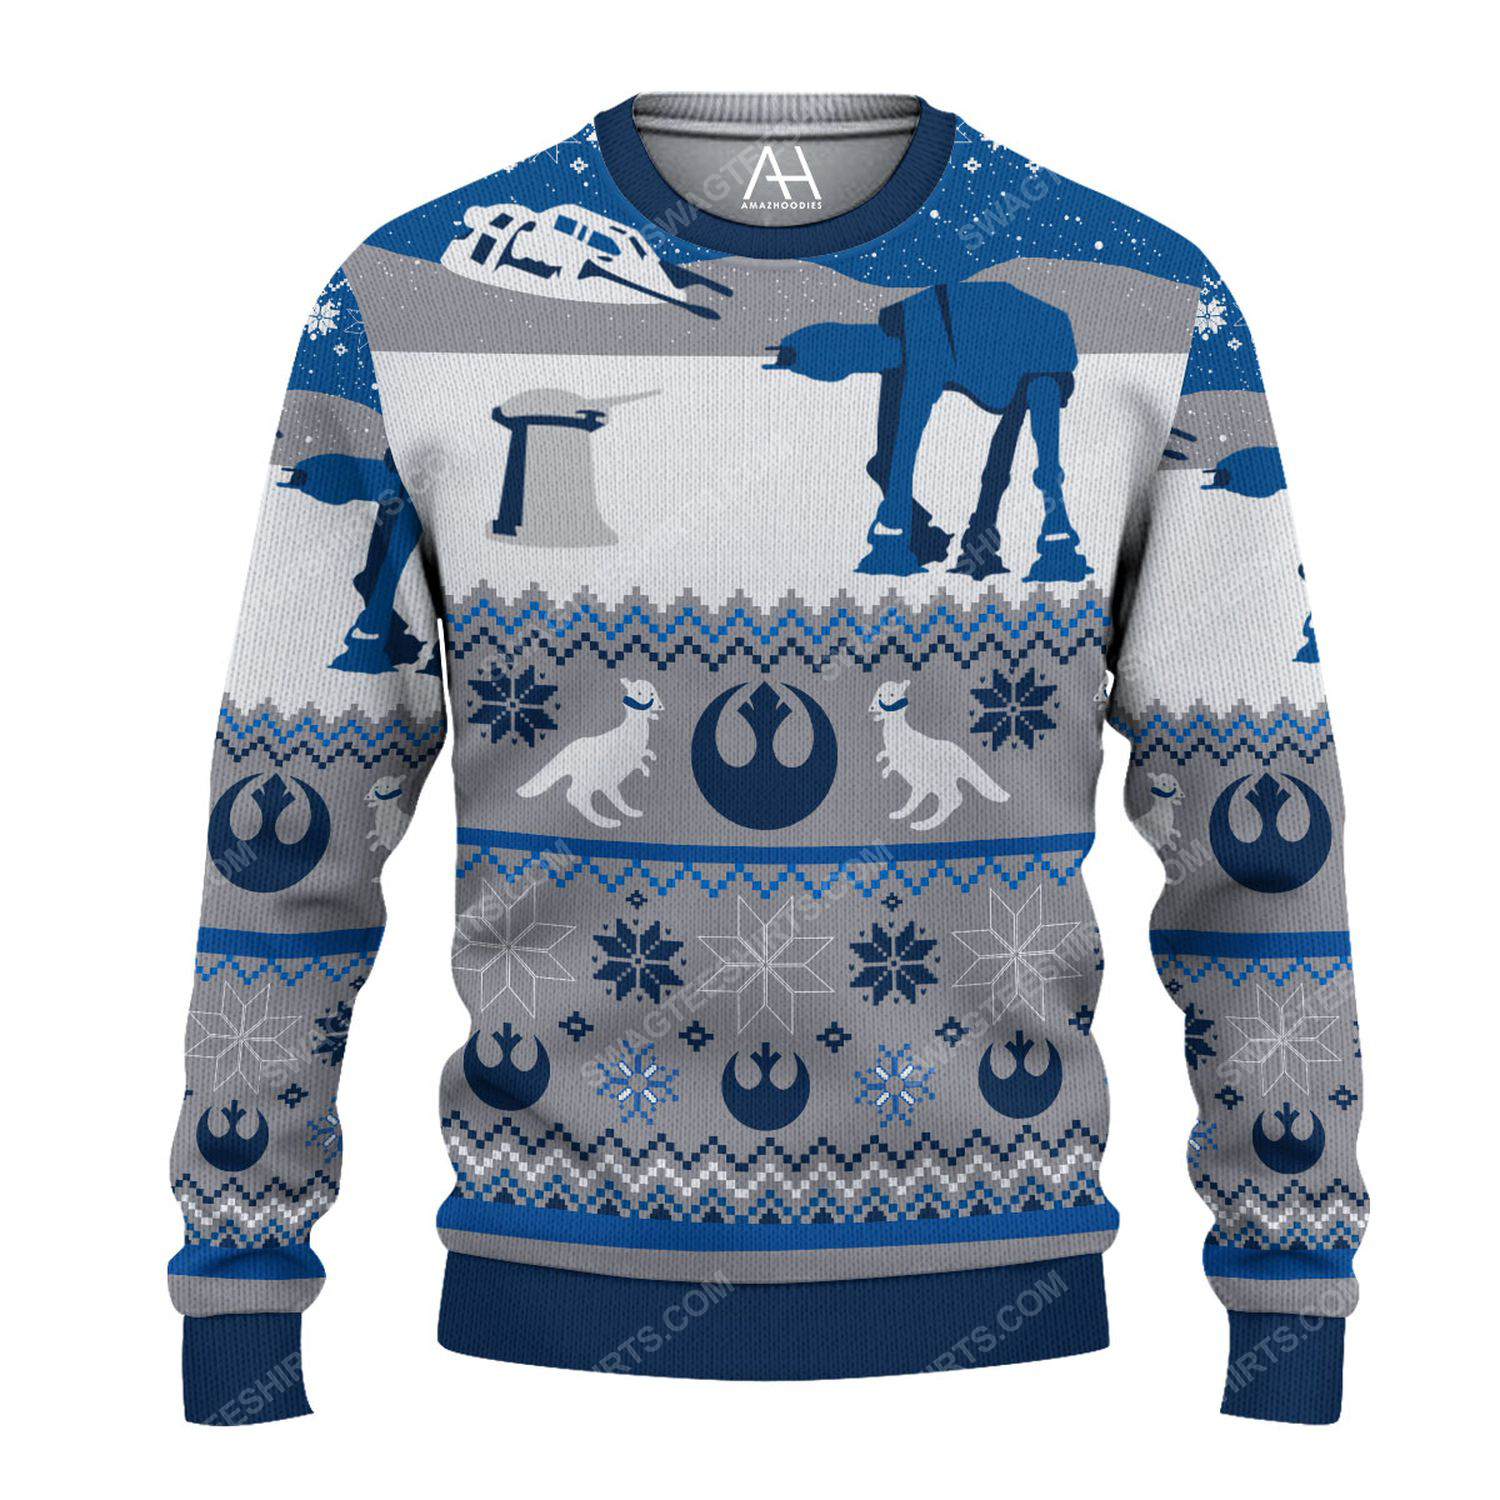 Star wars series movies ugly christmas sweater 1 - Copy (3)